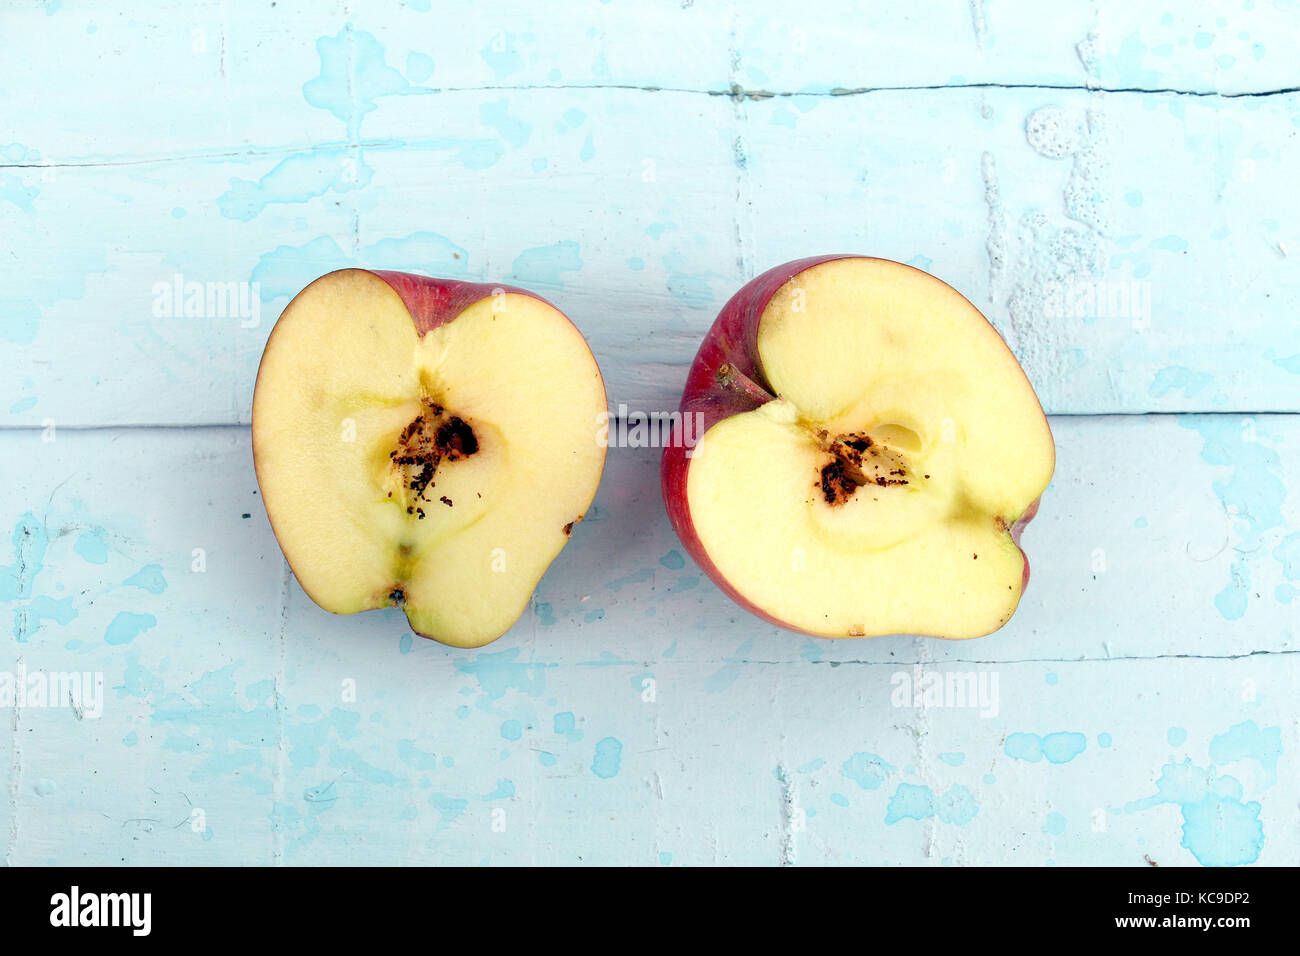 Rotten Apple with a Large Worm Stock Image - Image of oozing, overripe:  80511937